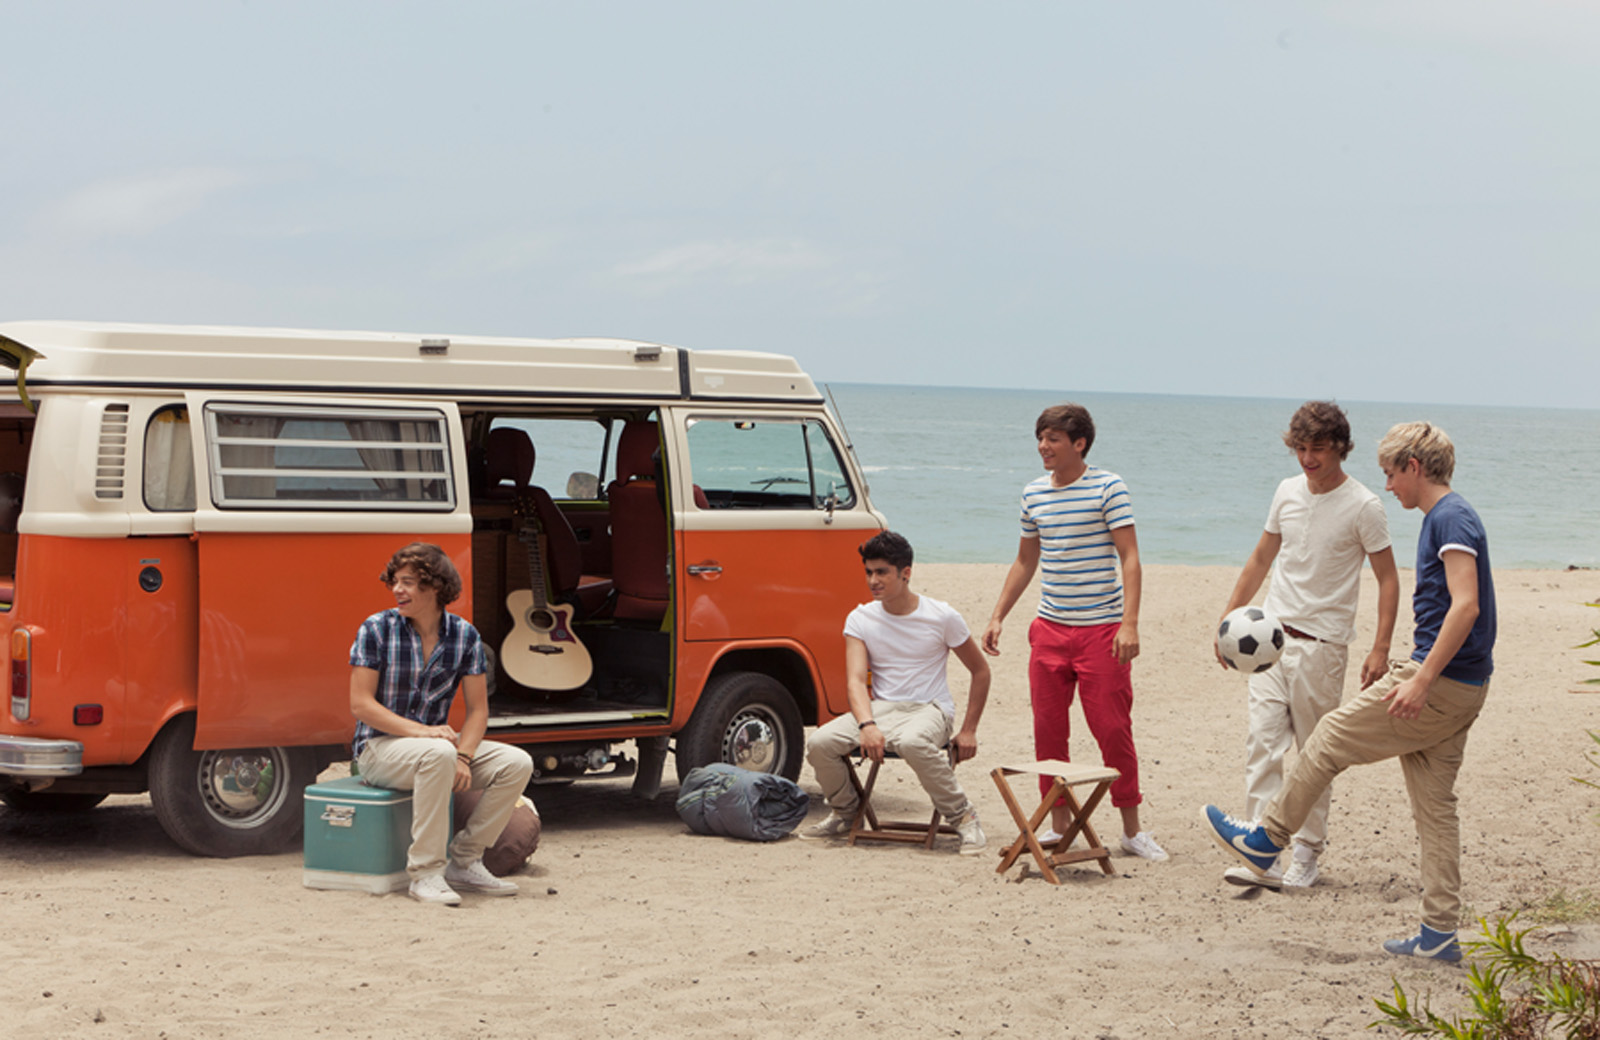 Louis Tomlinson in Music Video: What Makes You Beautiful